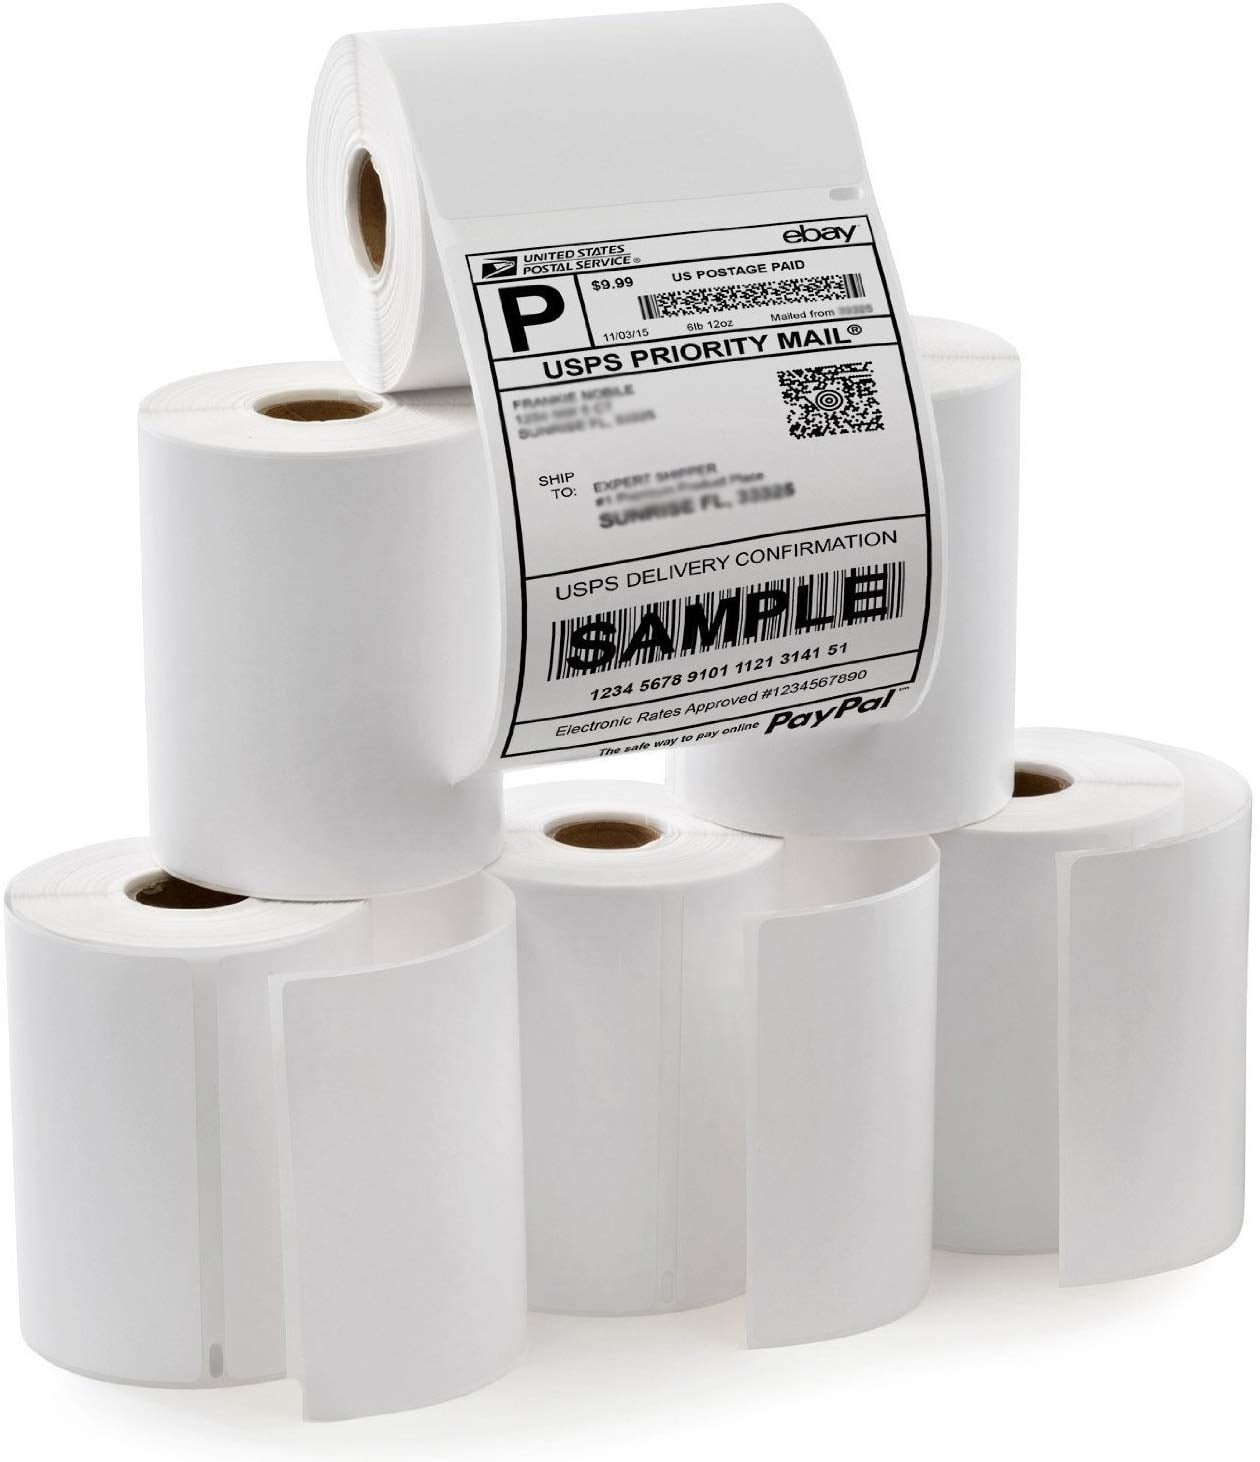 20 Rolls 220 Labels Per Roll Compatible Dymo 1744907-4 x 6 Dymo 4XL Postage BPA Labels